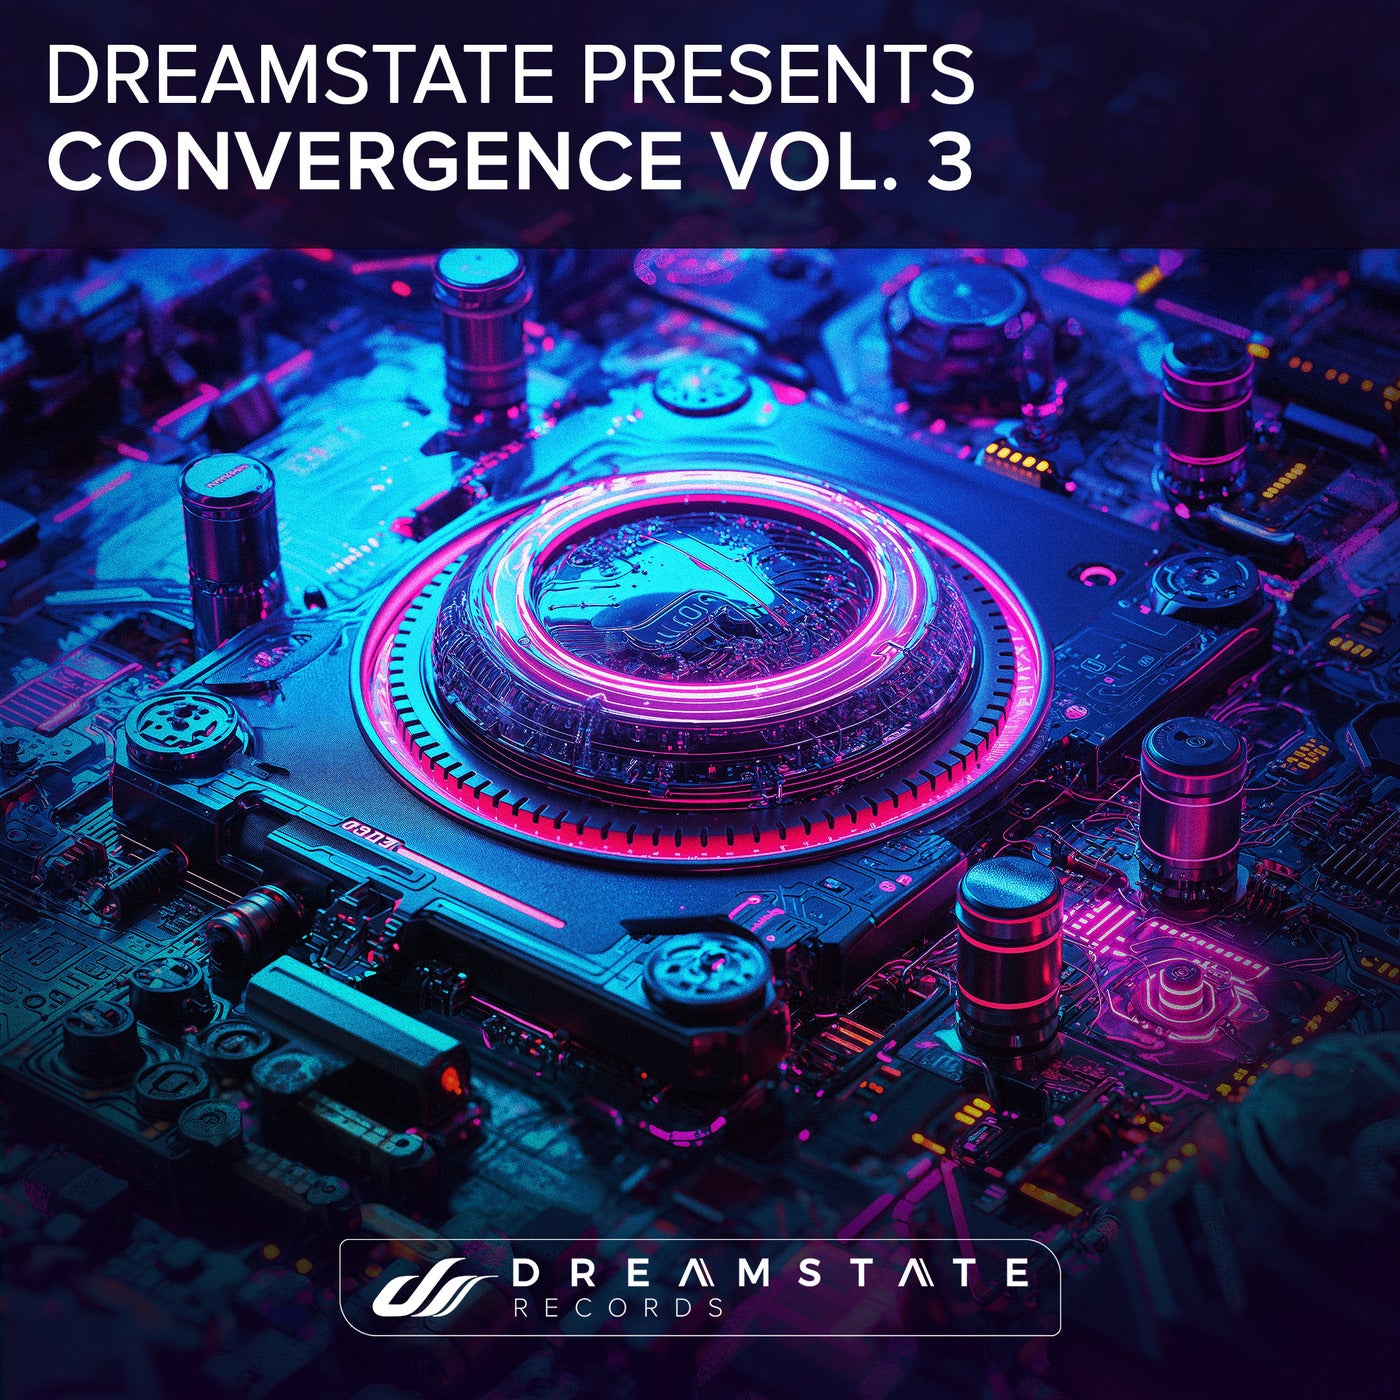 Dreamstate Music & Downloads on Beatport